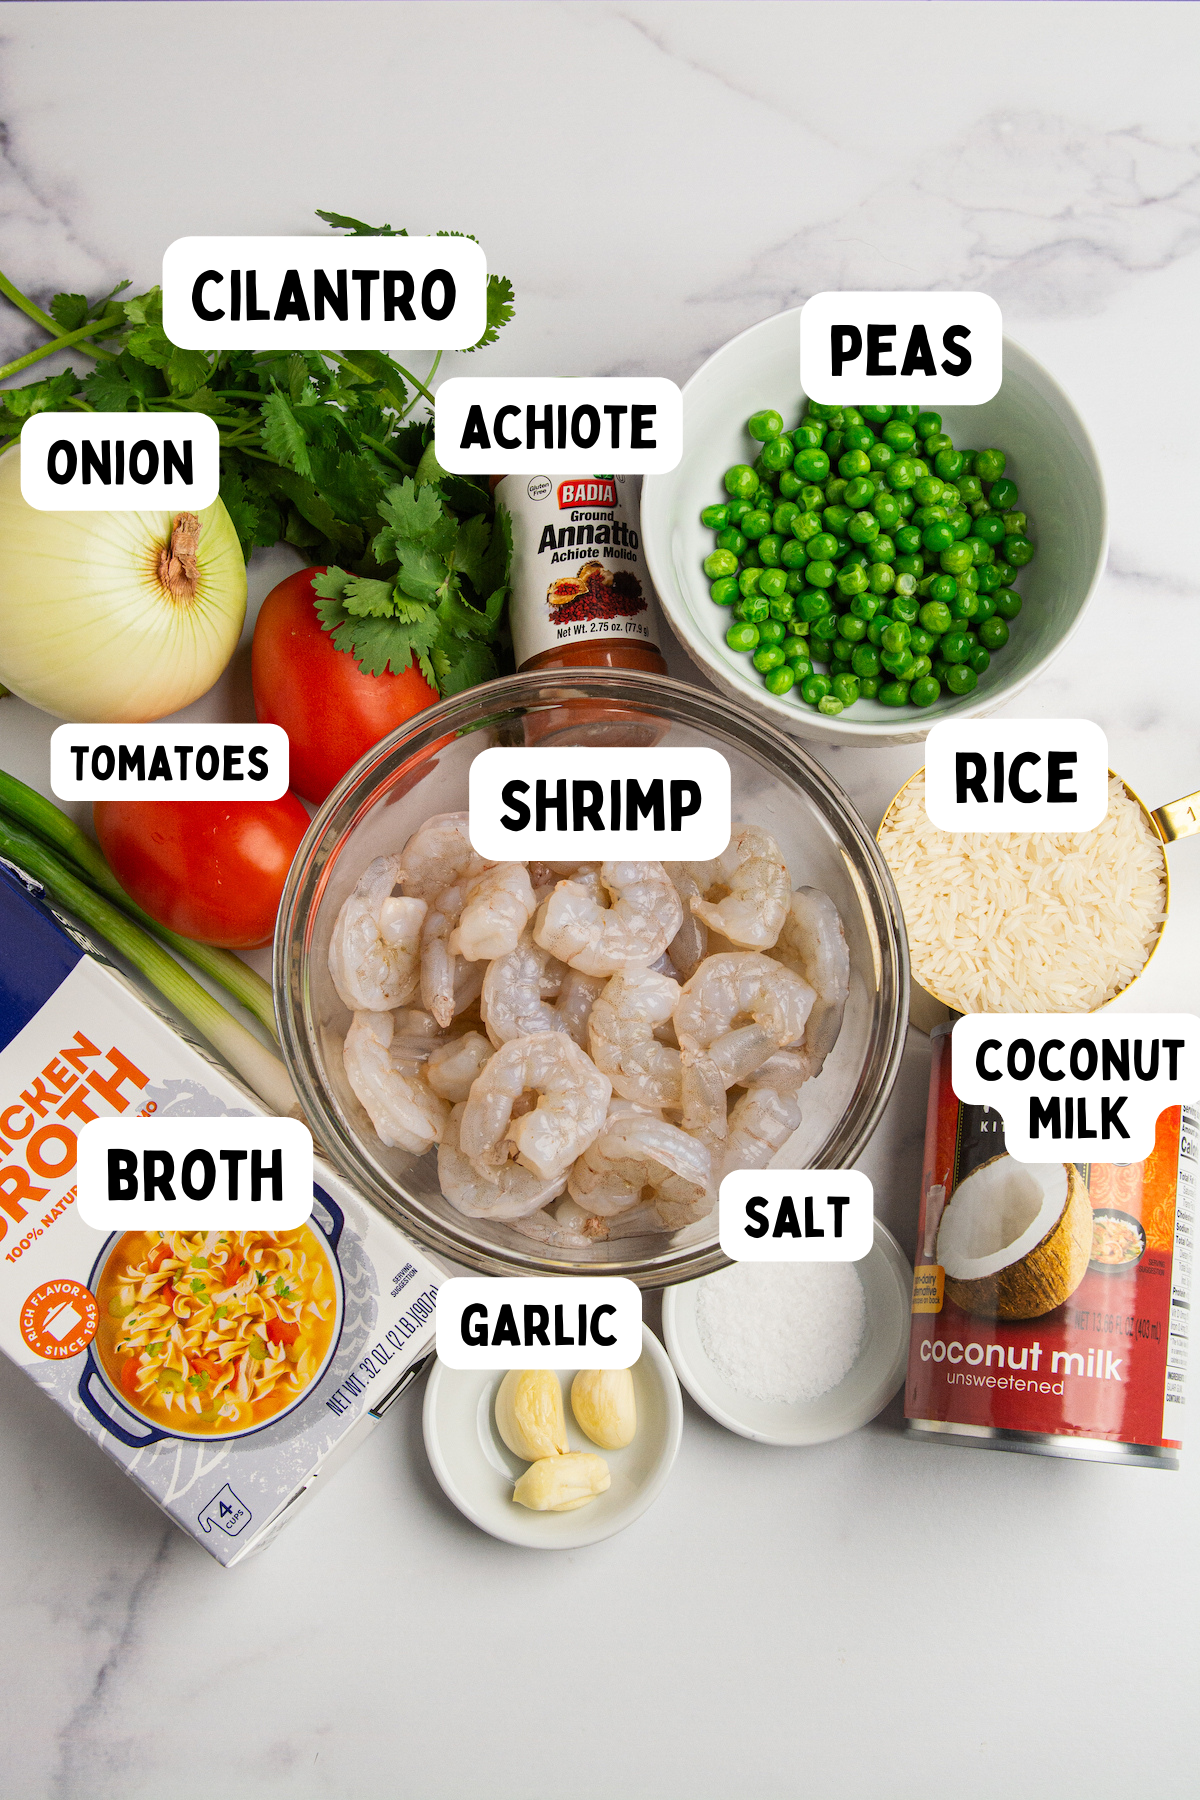 Ingredients for making arroz con camarones or shrimp and rice. Rice, shrimp, onion, garlic, tomatoes, cilantro, sweet peas, achiote, chicken broth, coconut milk, and salt.